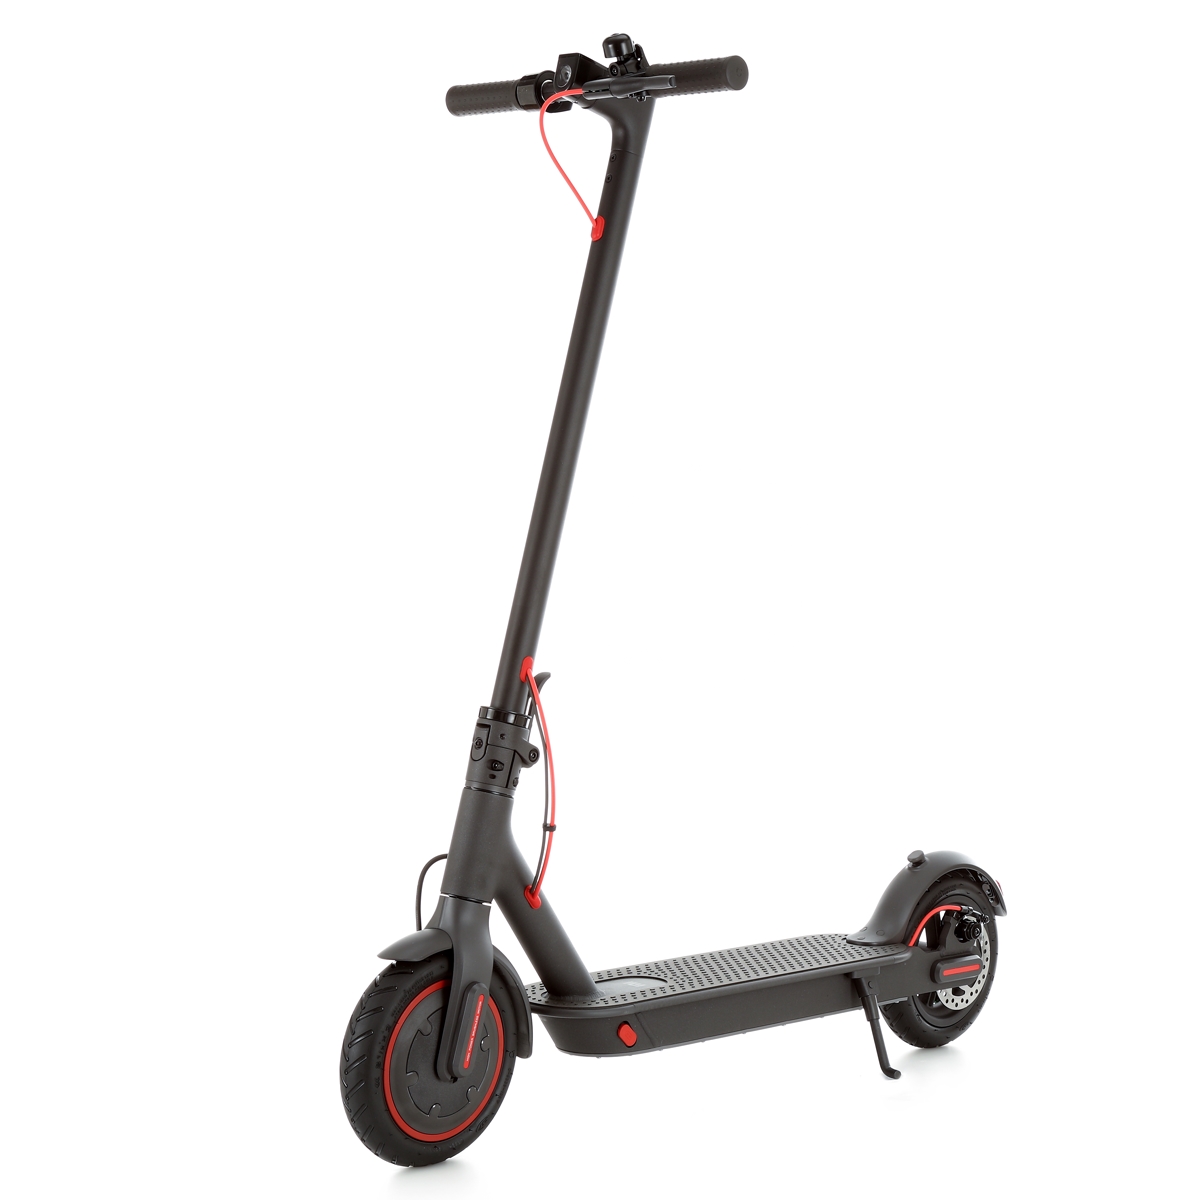 Popular electric scooter by Xiaomi - M365 PRO.